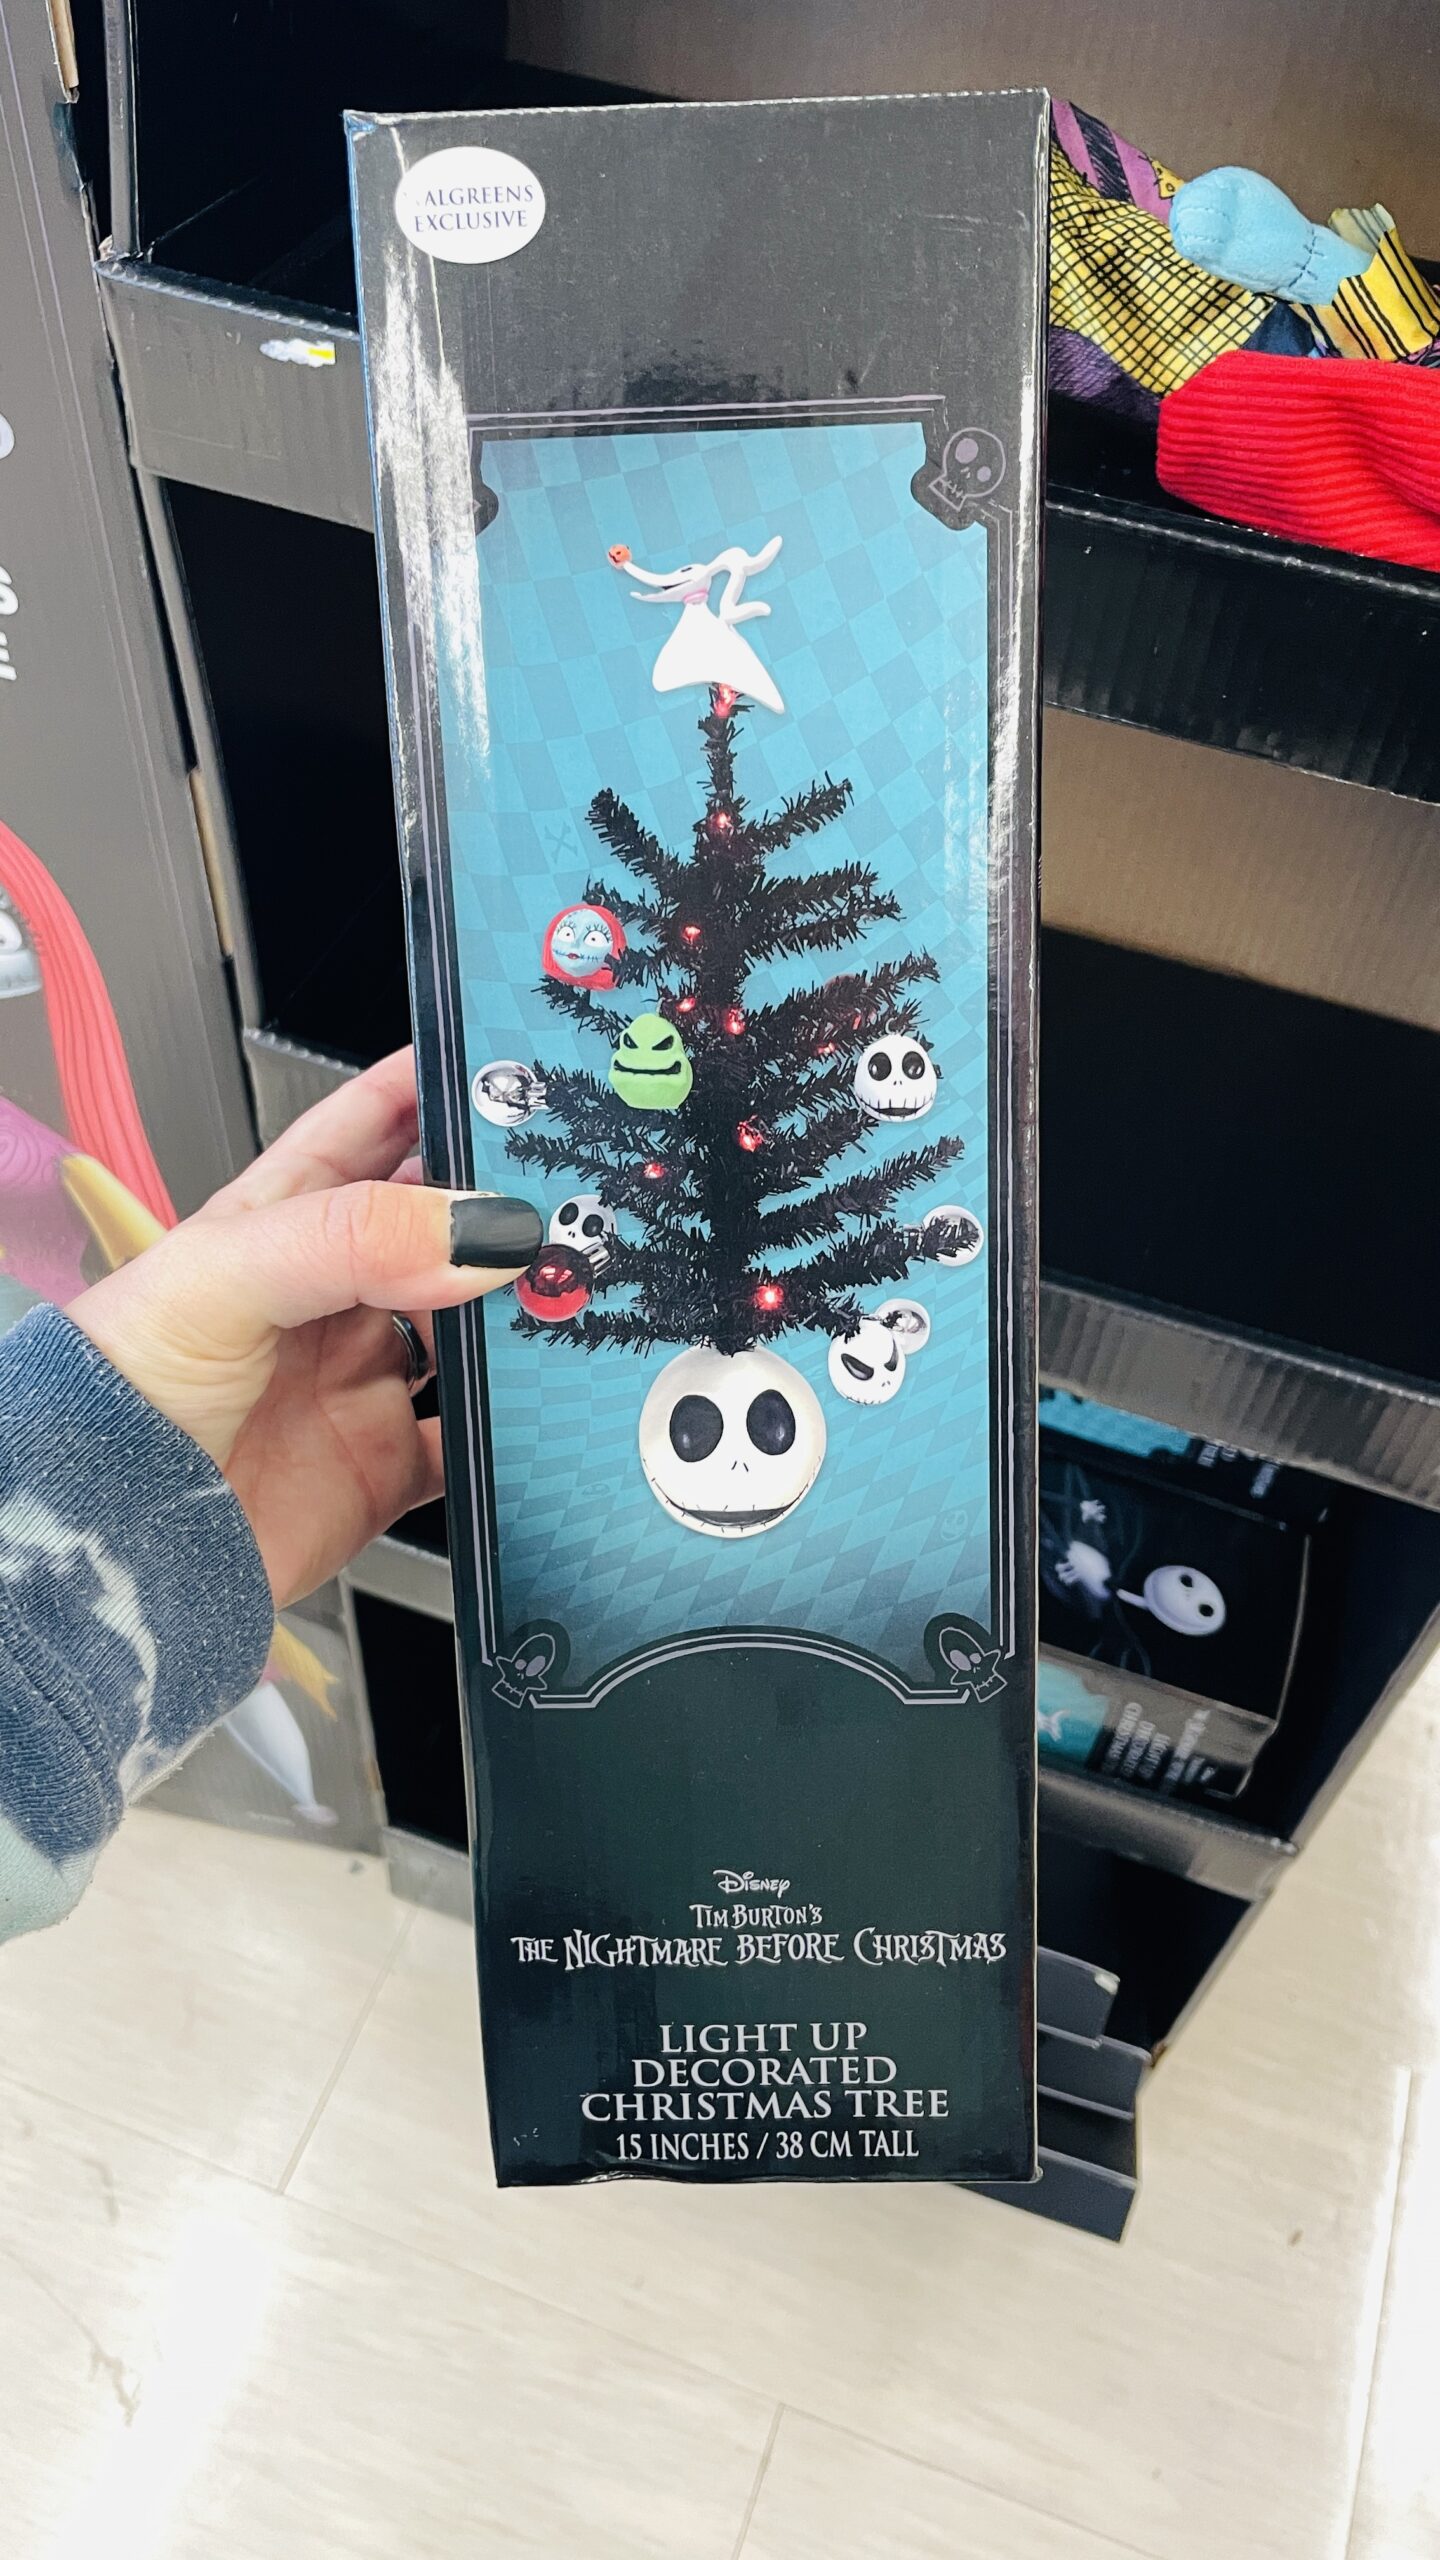 Walgreens Is Selling Nightmare Before Christmas Decorations Just In